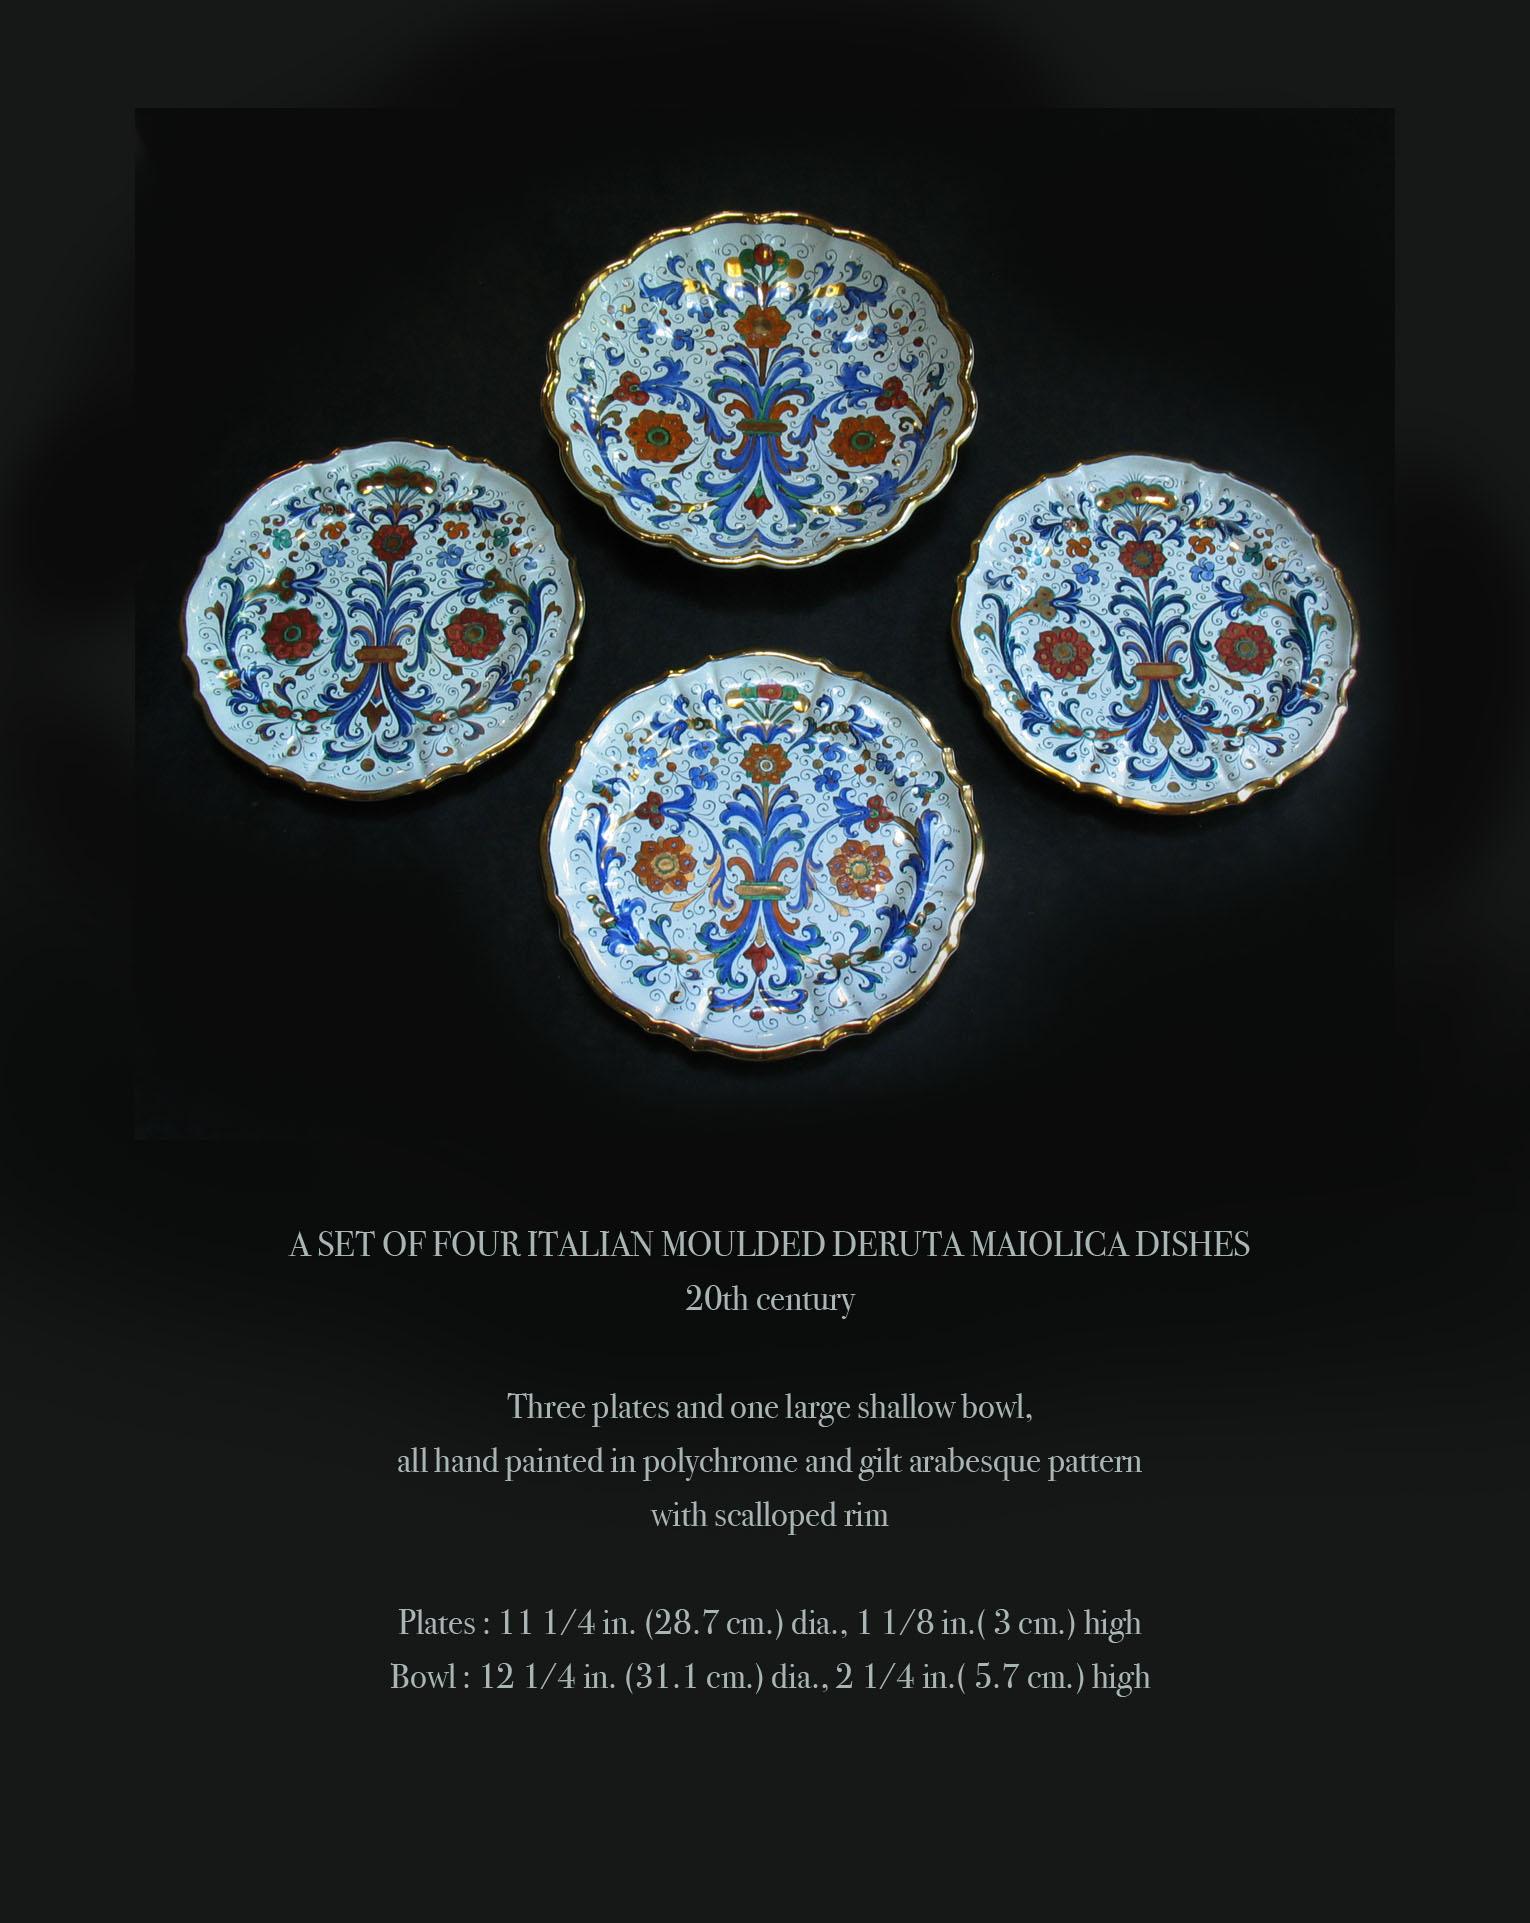 A set of four Italian molded Deruta Maiolica/Majolica dishes
20th century

Three plates and one large shallow bowl,
all hand painted in polychrome and gilt arabesque pattern
with scalloped rim.

Plates: 11 1/4 in. (28.7 cm.) dia., 1 1/8 in.(3